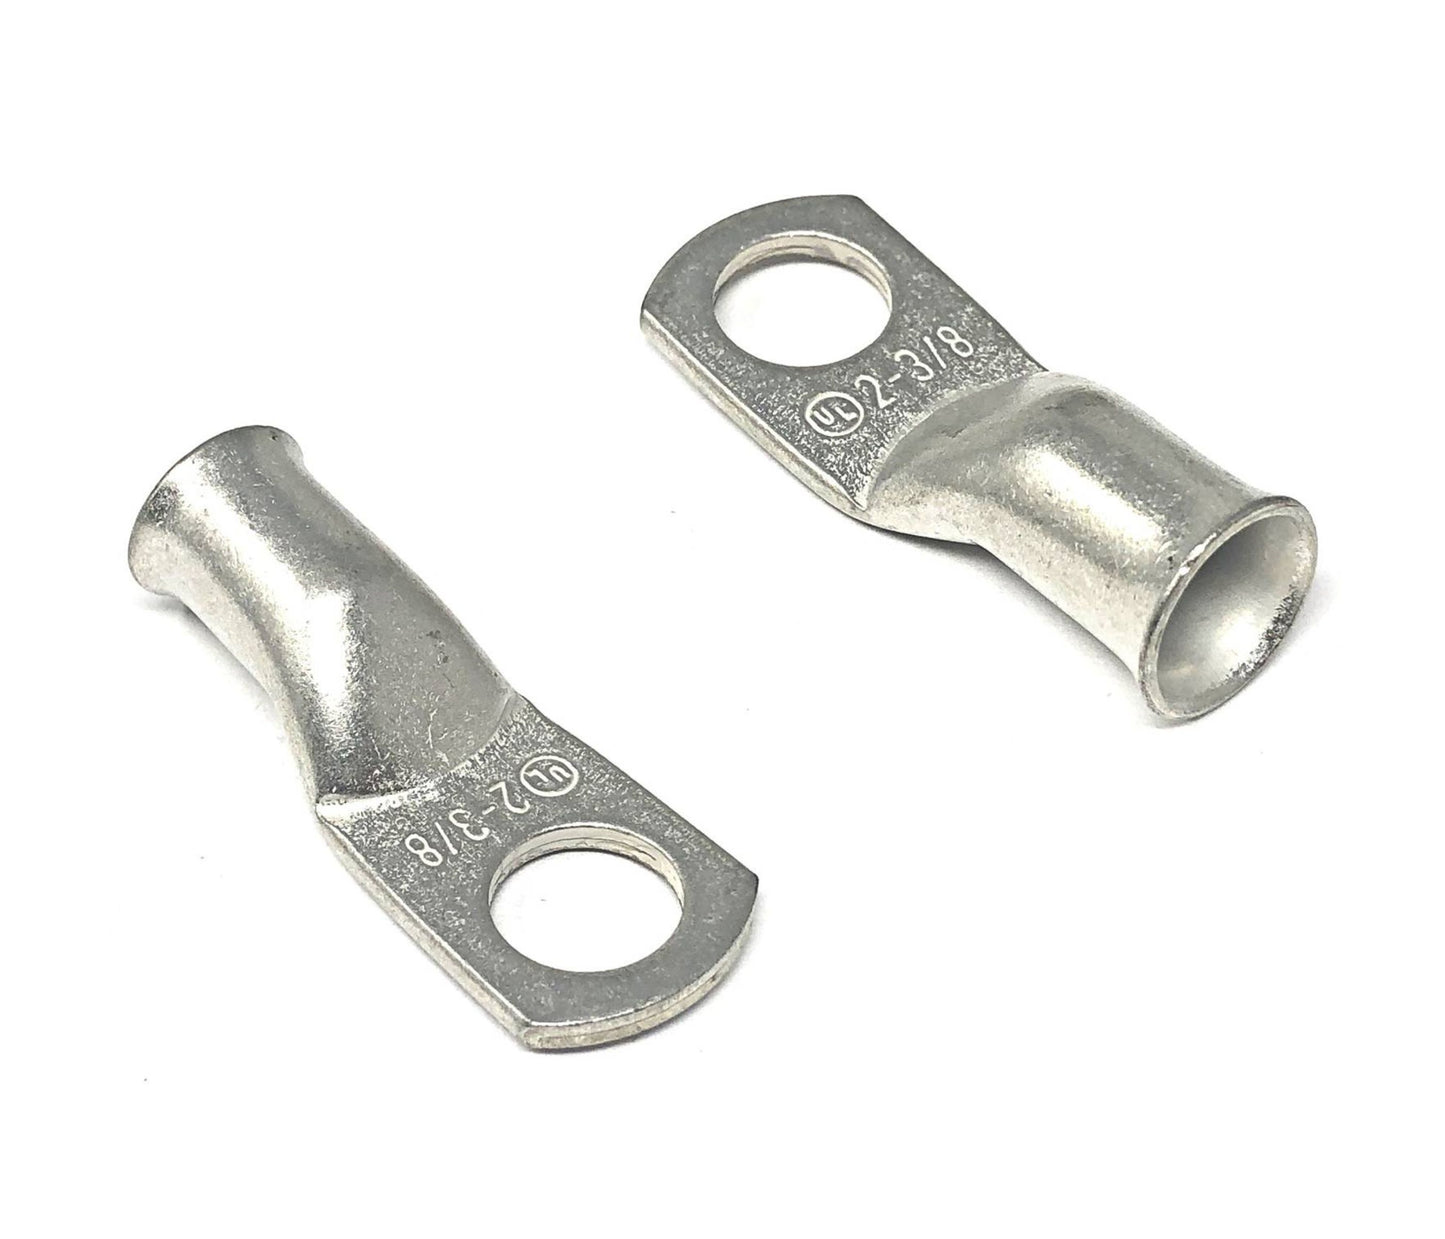 2 Gauge (AWG) Pure Copper Cable Lug Connector Ring Terminals